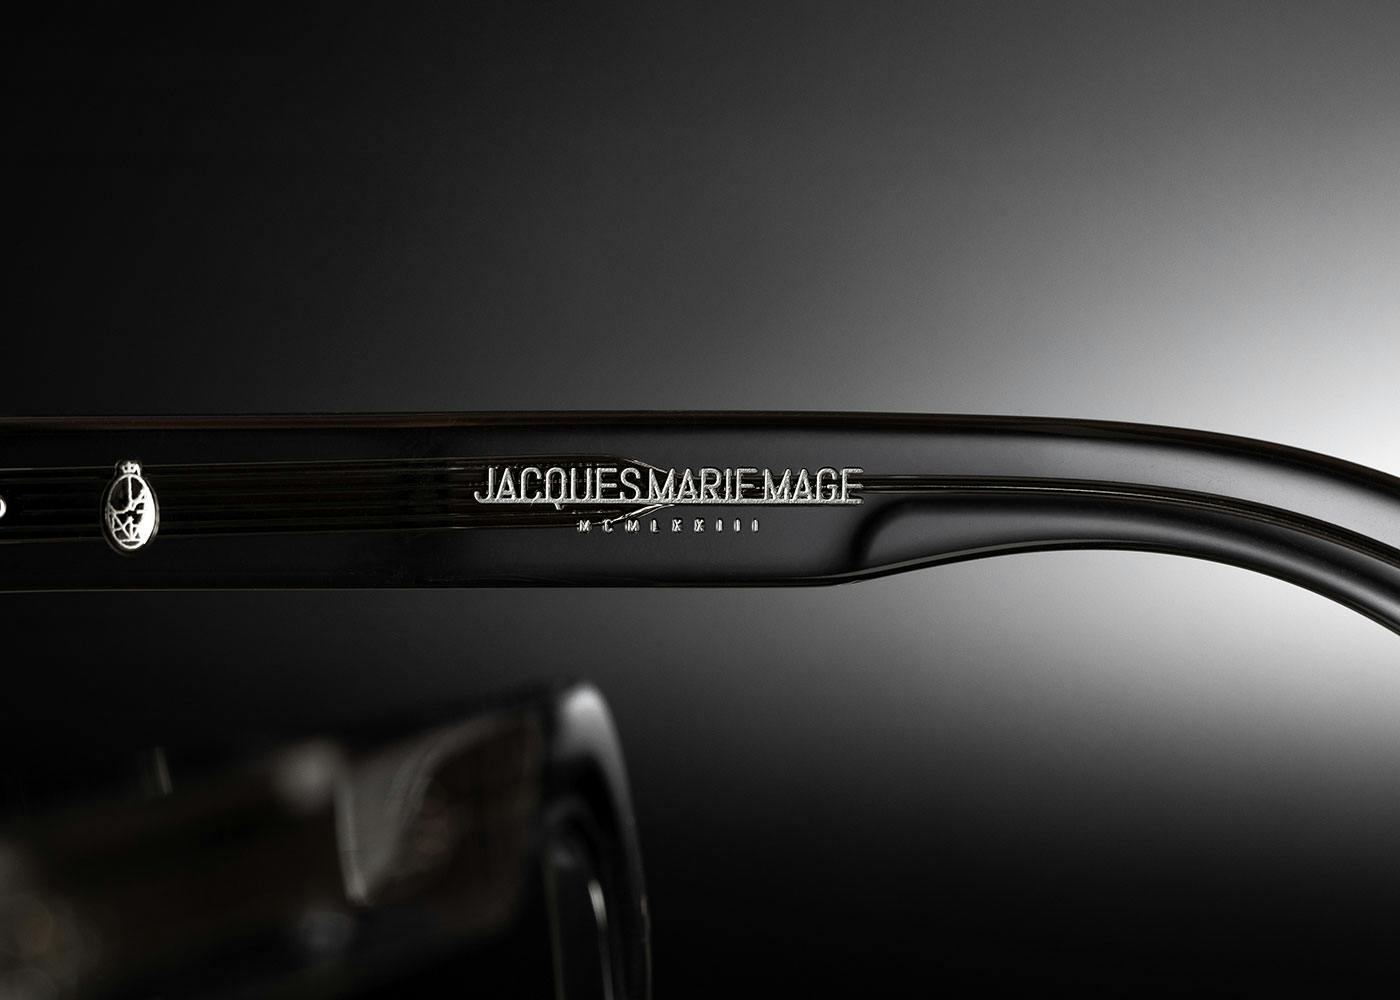 Part of a Jacques Marie Mage glasses